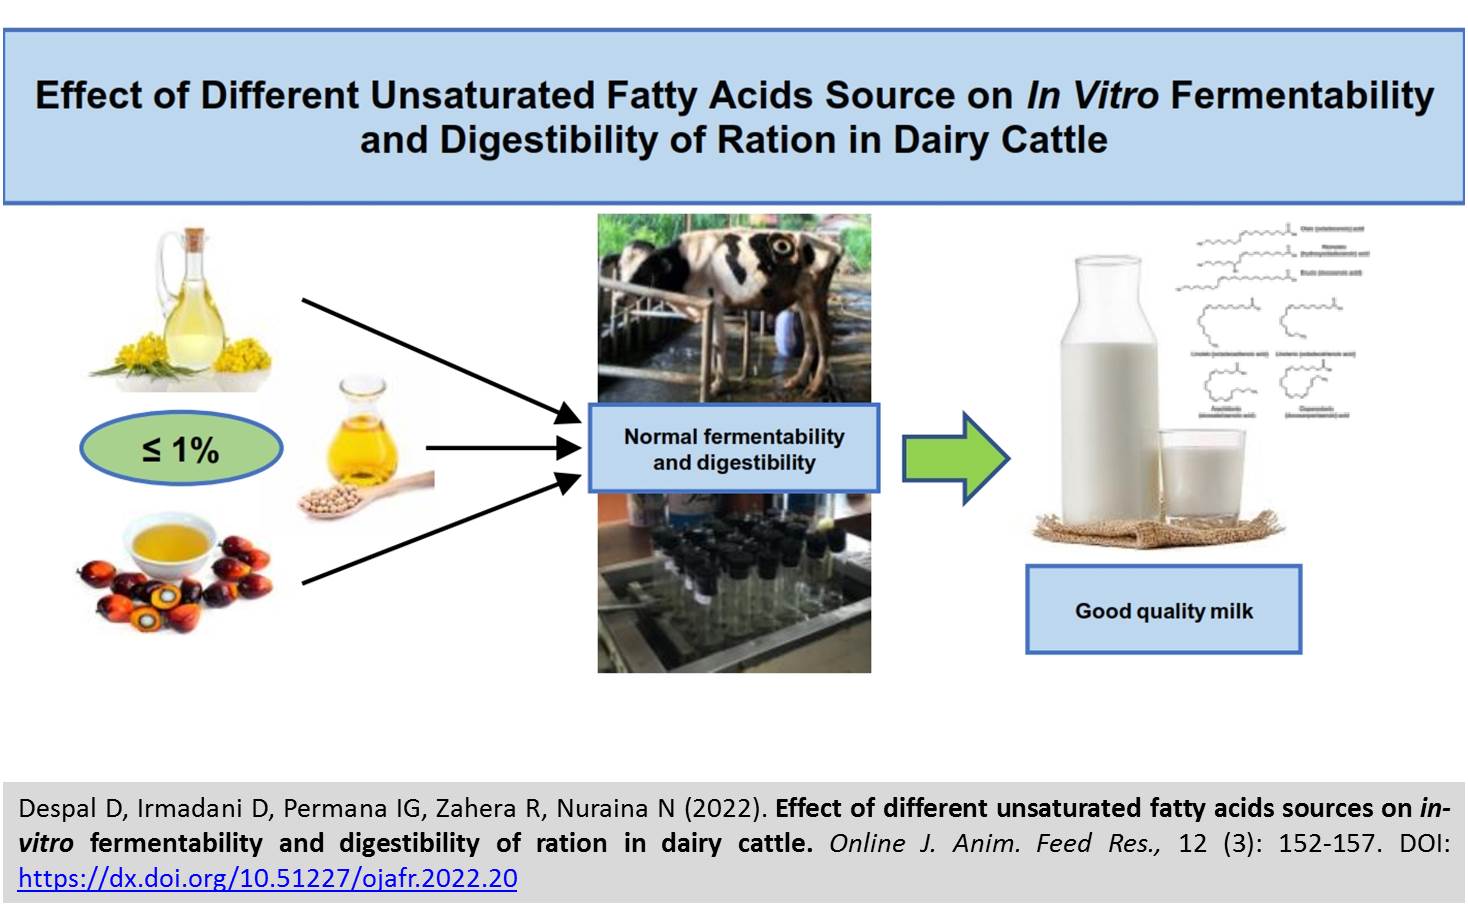 85-unsaturated_fatty_acids_sources_on_in-vitro_fermentability_and_digestibility_of_ration_in_dairy_cattle